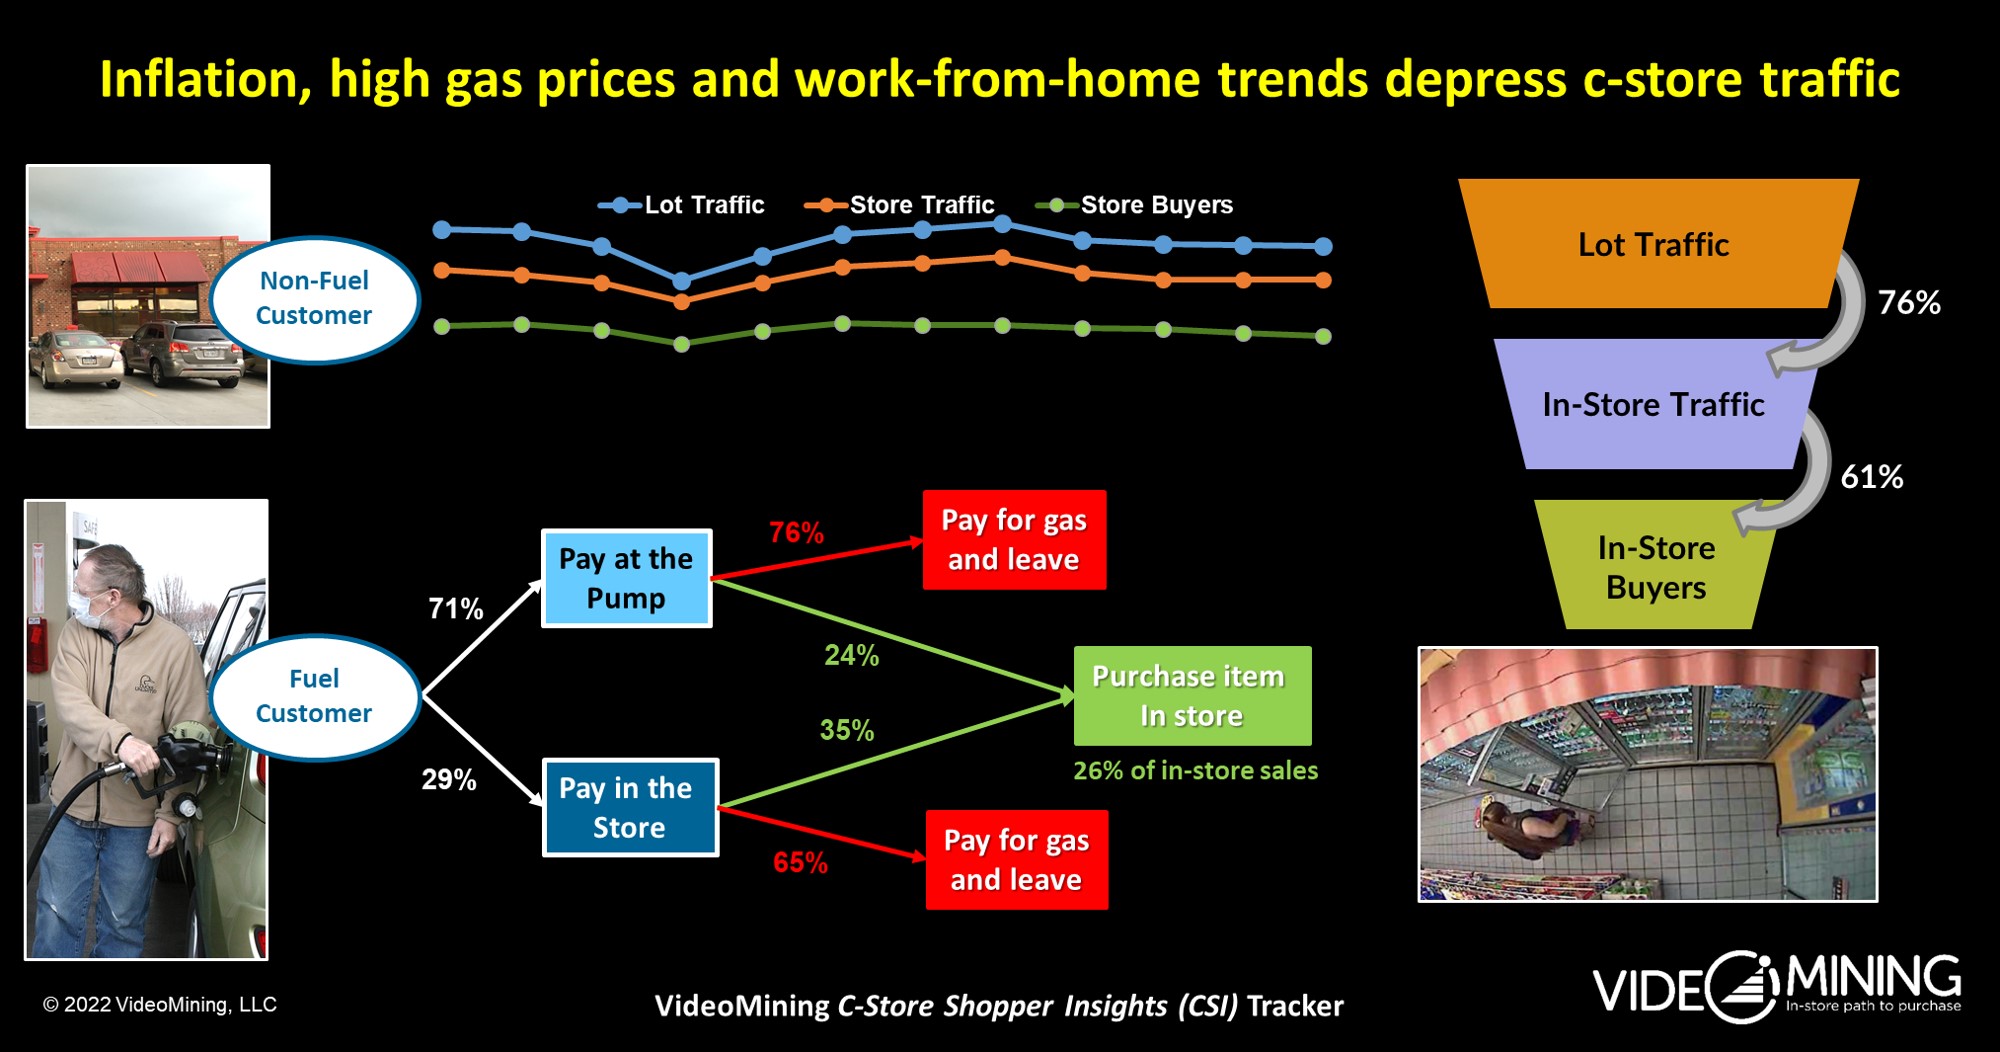 Inflation, high gas prices and work-from-home trends depress c-store traffic